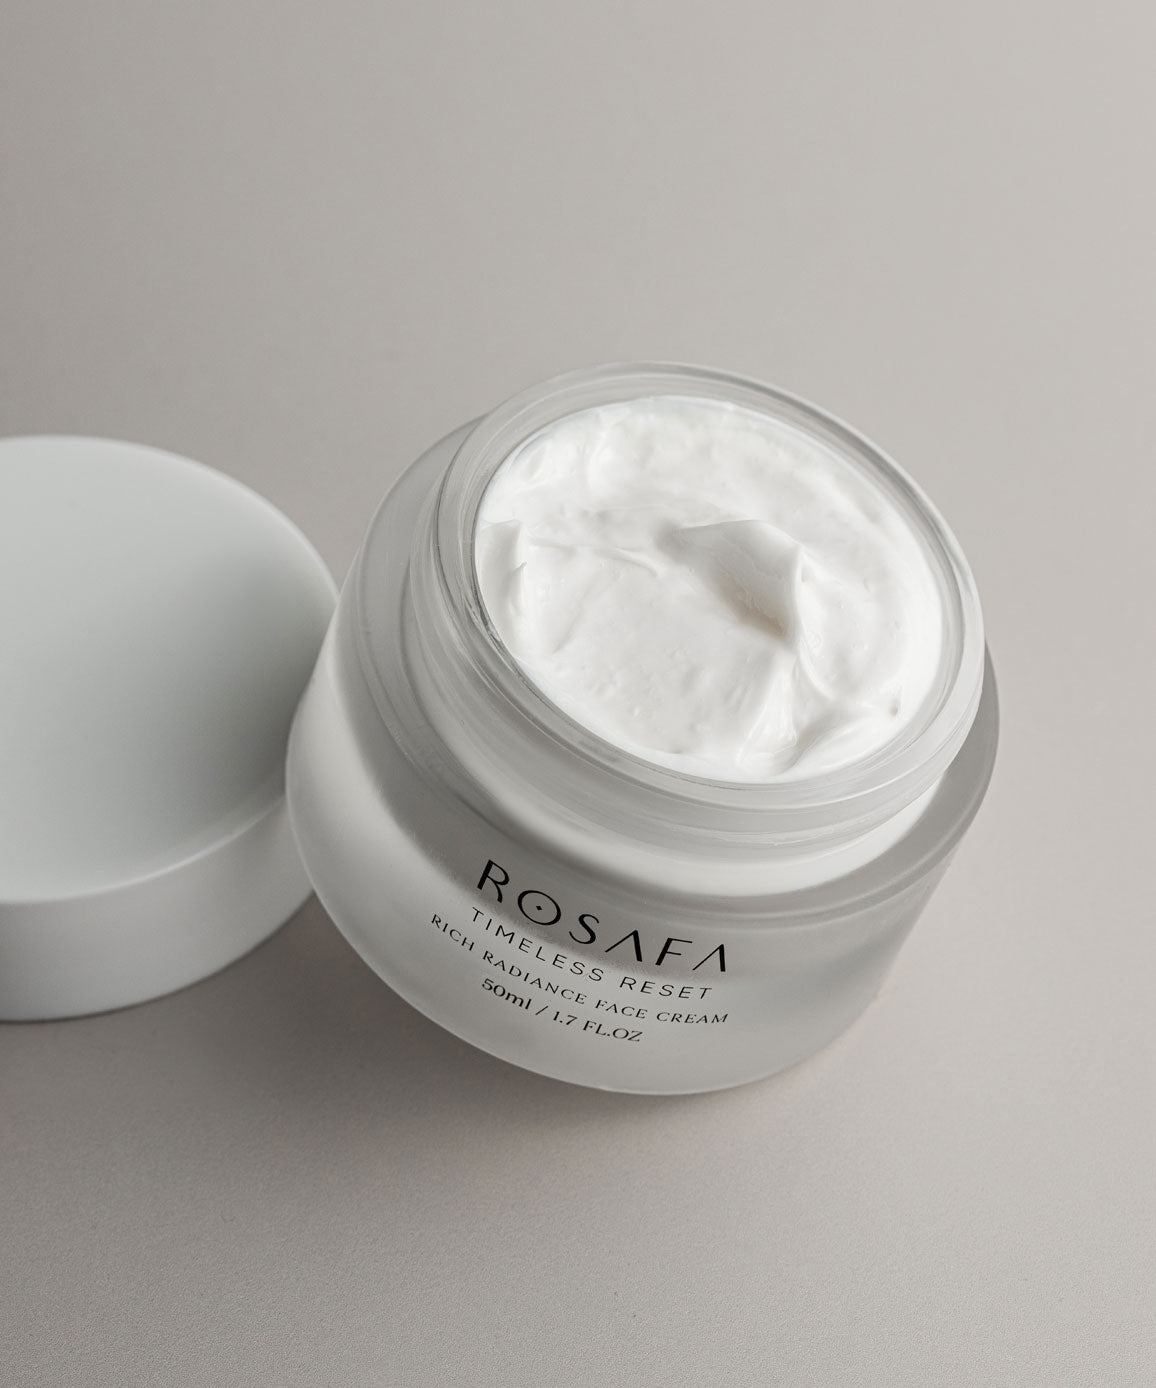 rosafa timeless reset rich radiance face cream opened